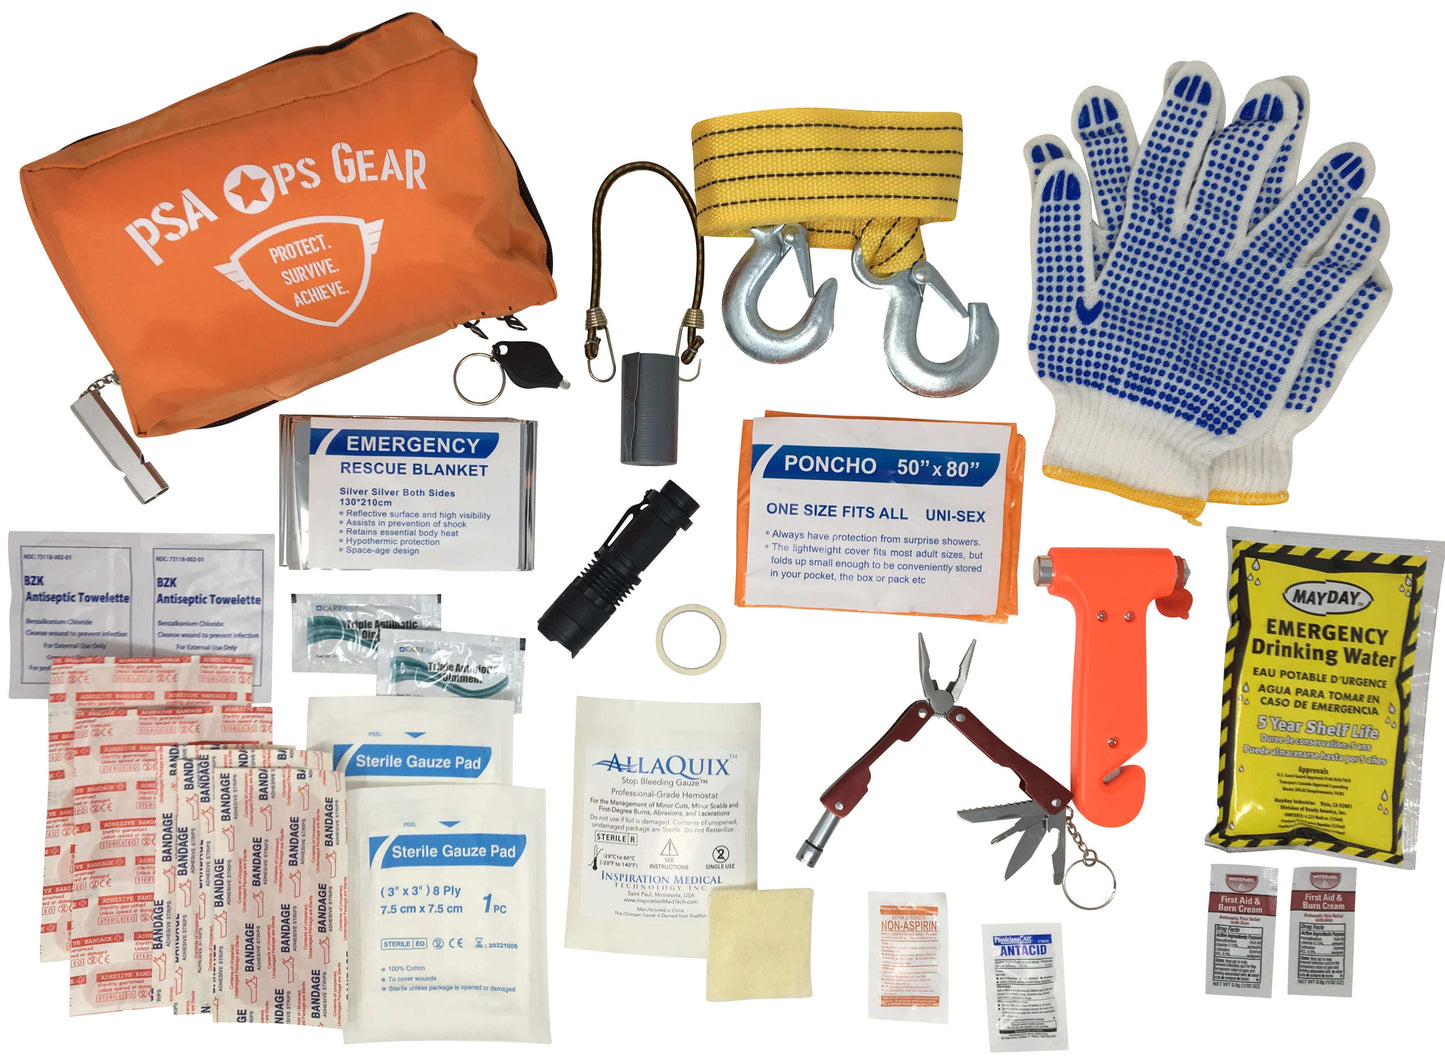 Vehicle Emergency Survival Safety Kit (Deluxe) - Everyday Carry Kit (EDC) with First Aid Kit